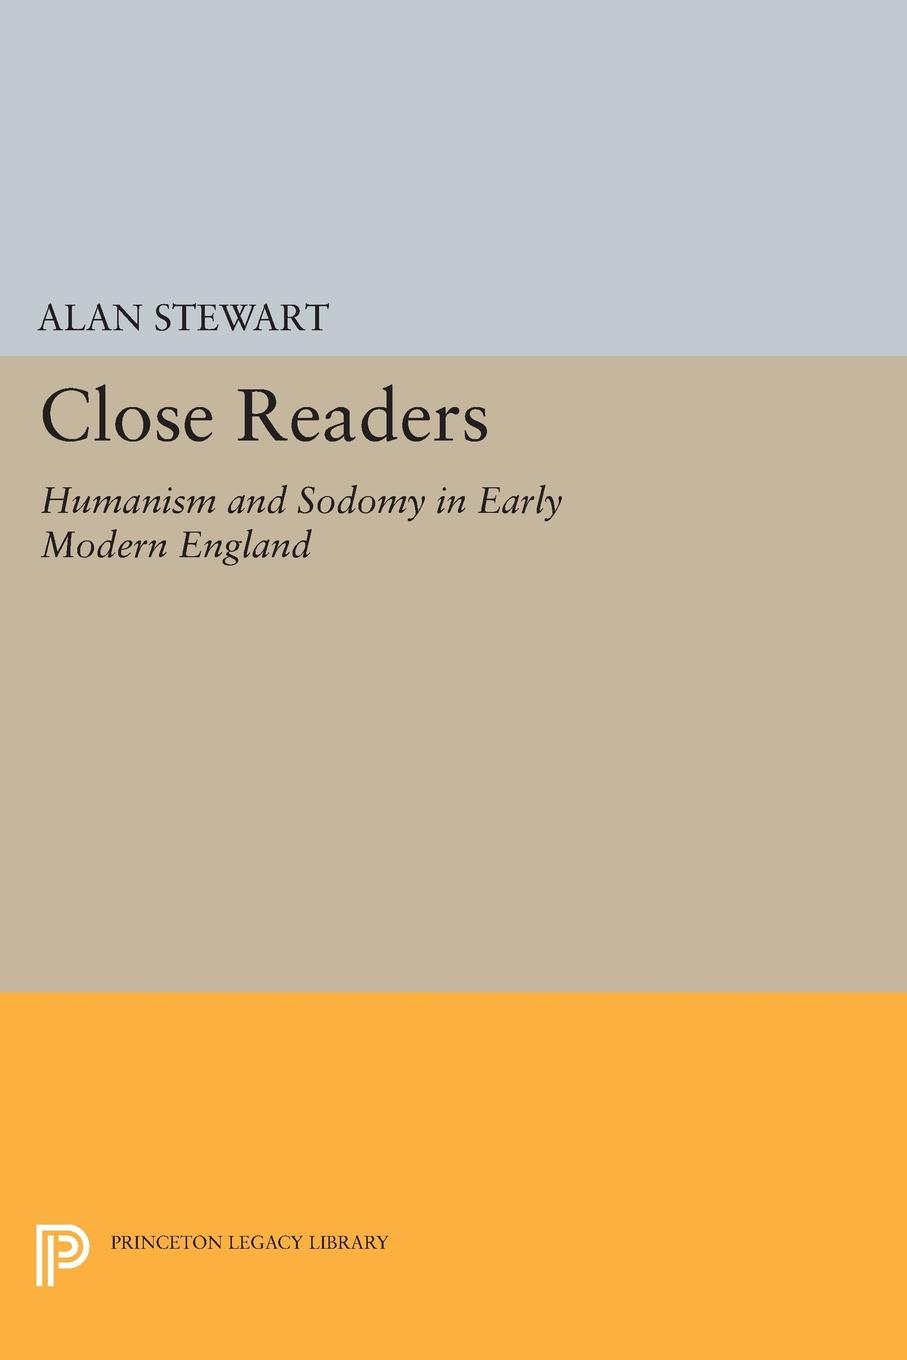 Close Readers. Humanism and Sodomy in Early Modern England